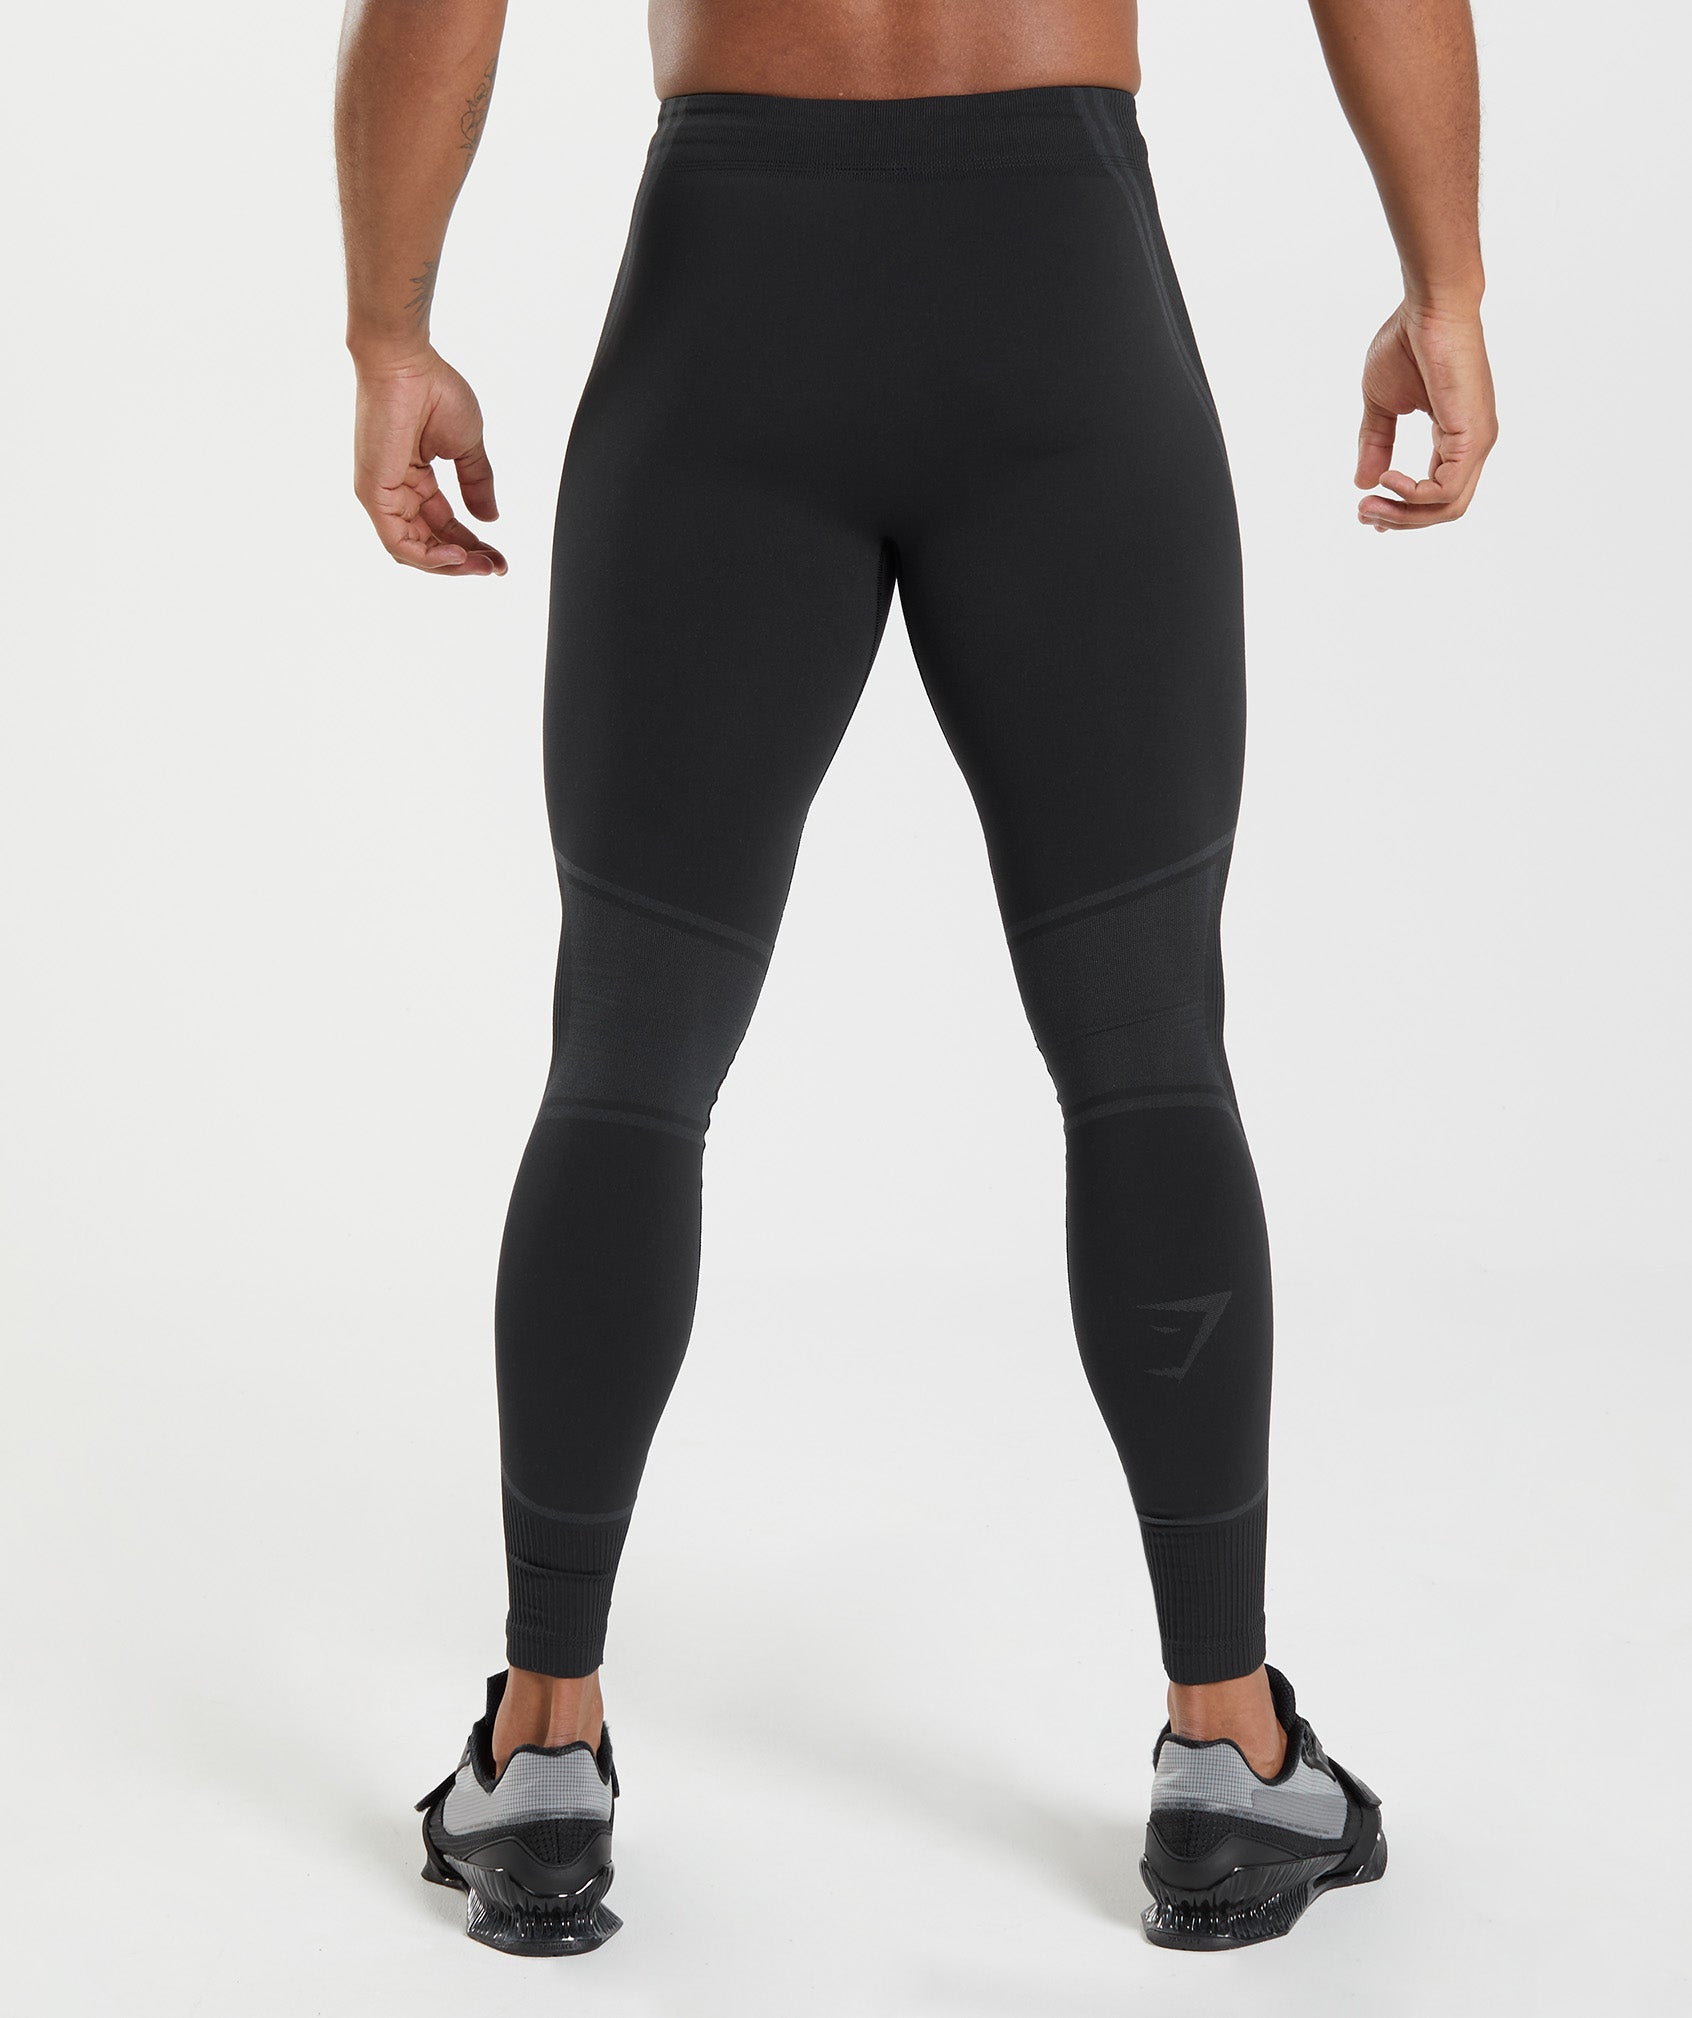 315 Seamless Tights in Black/Charcoal Grey - view 2